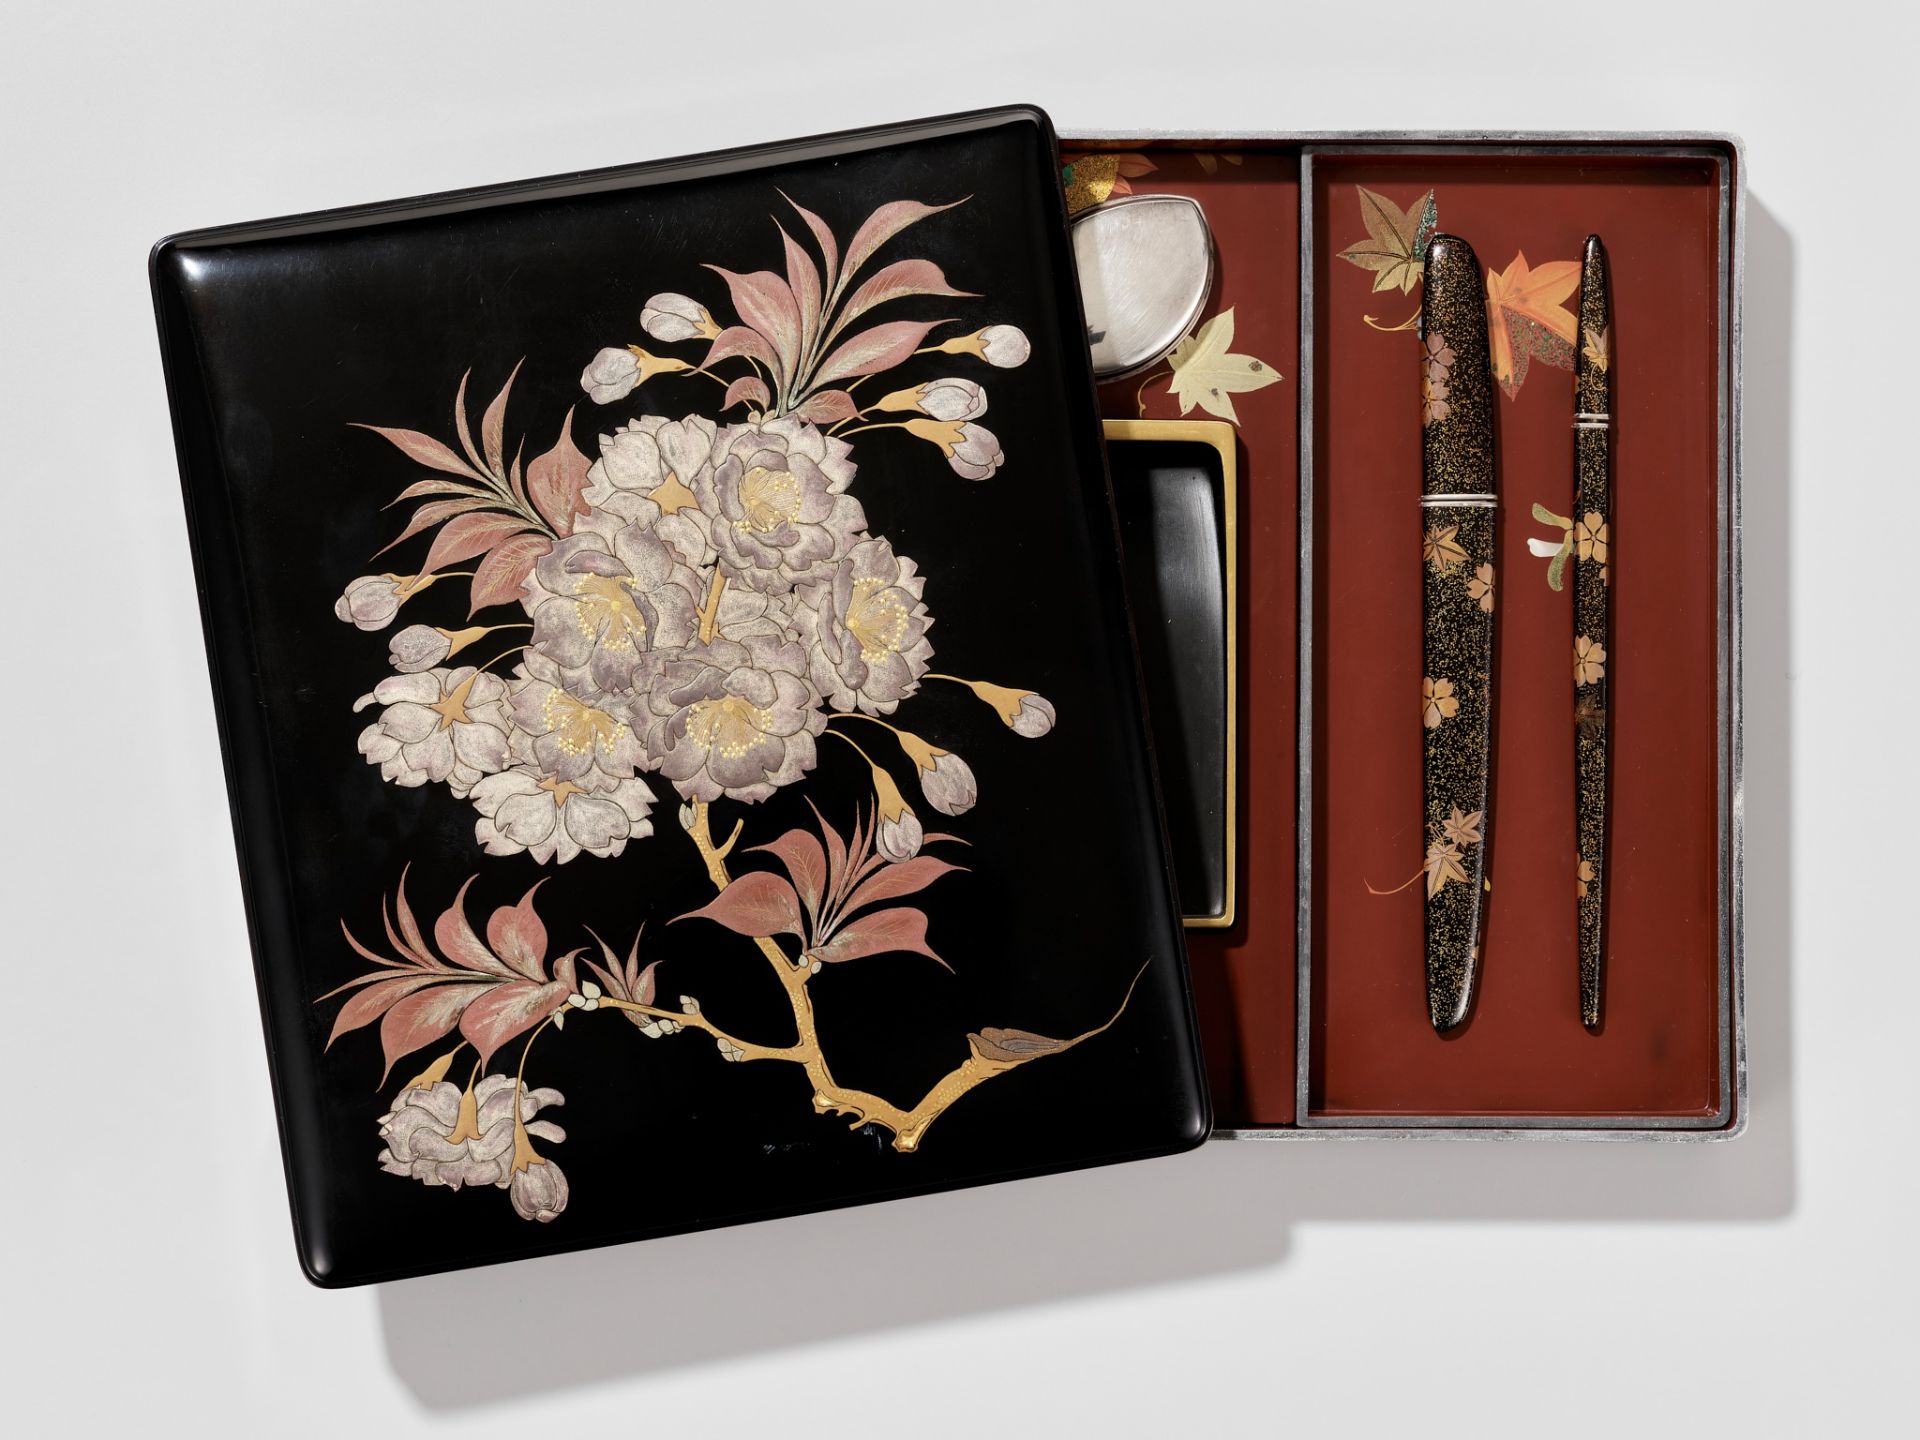 A LACQUER SUZURIBAKOO DEPICTING BLOSSOMING BELLFLOWERS (KIKYO) AND MAPLE LEAVES